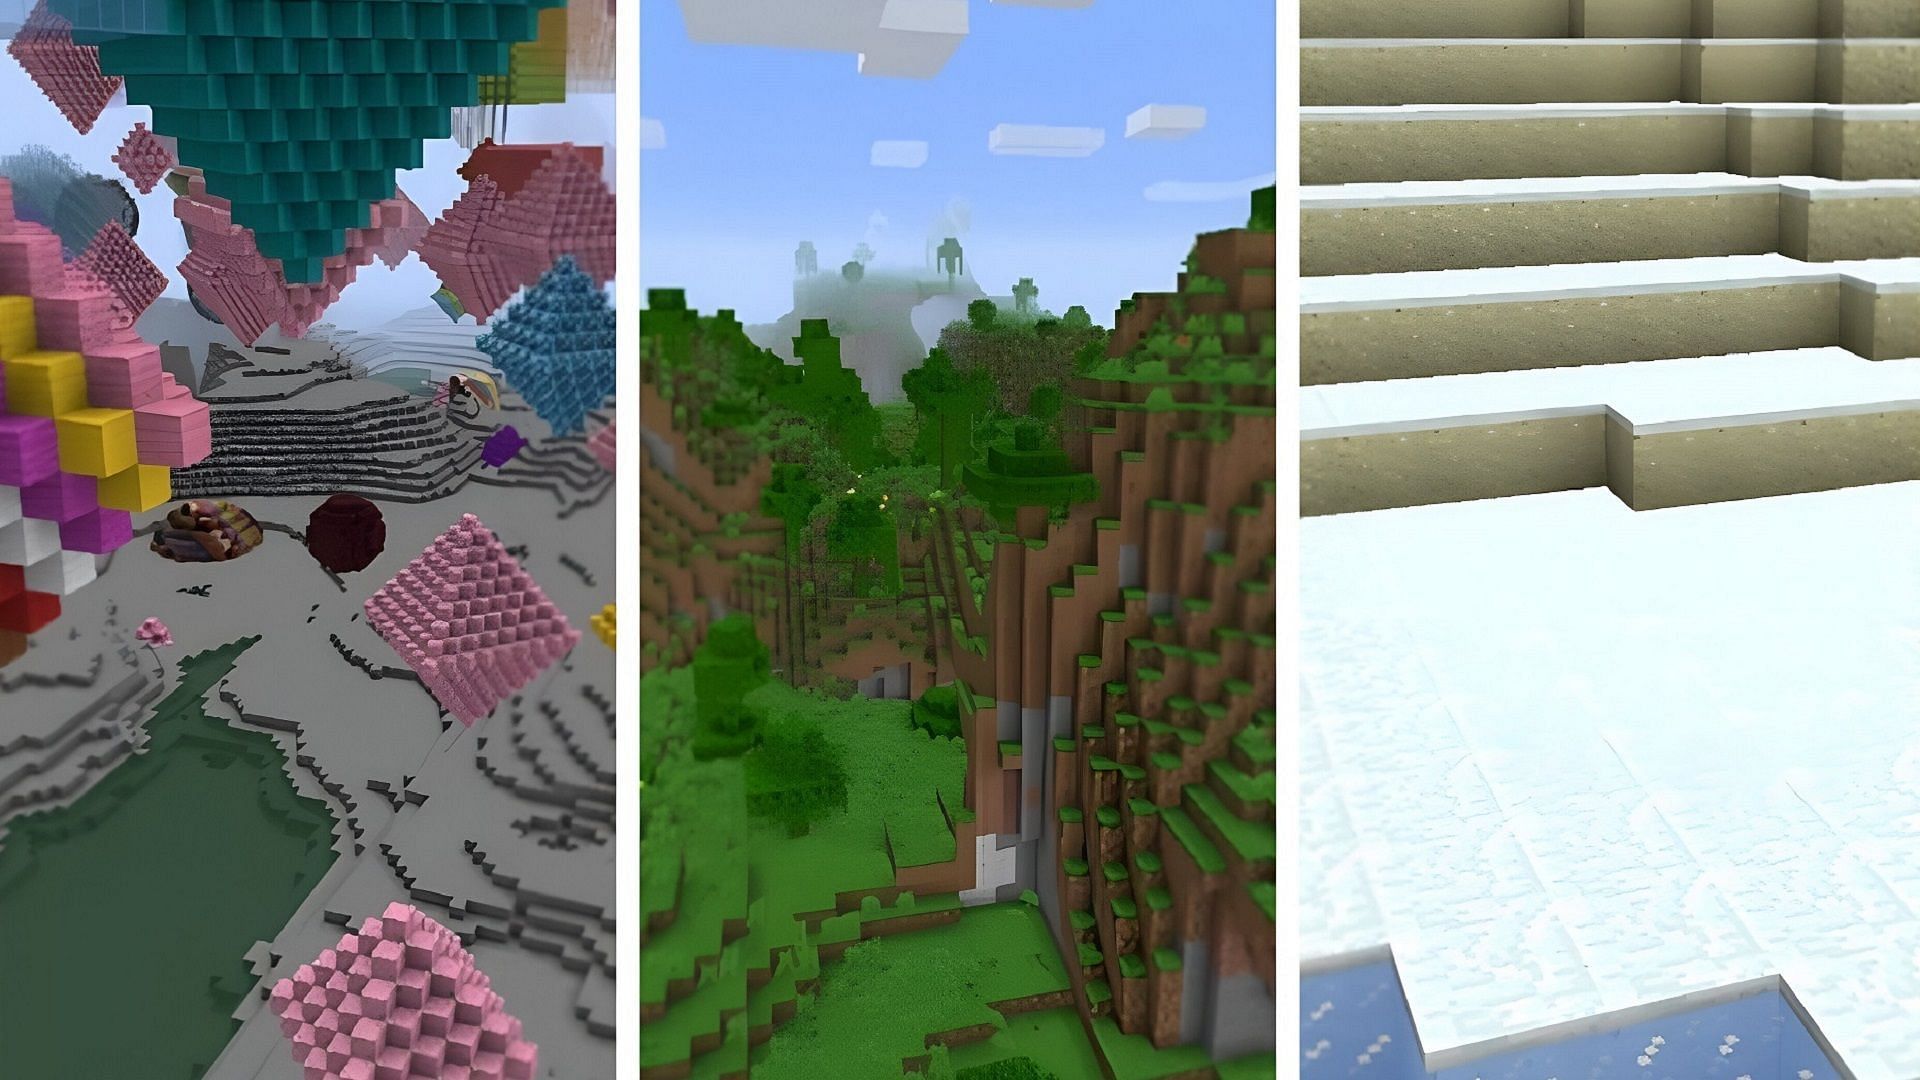 Various forgotten biomes as seen in Minecraft.